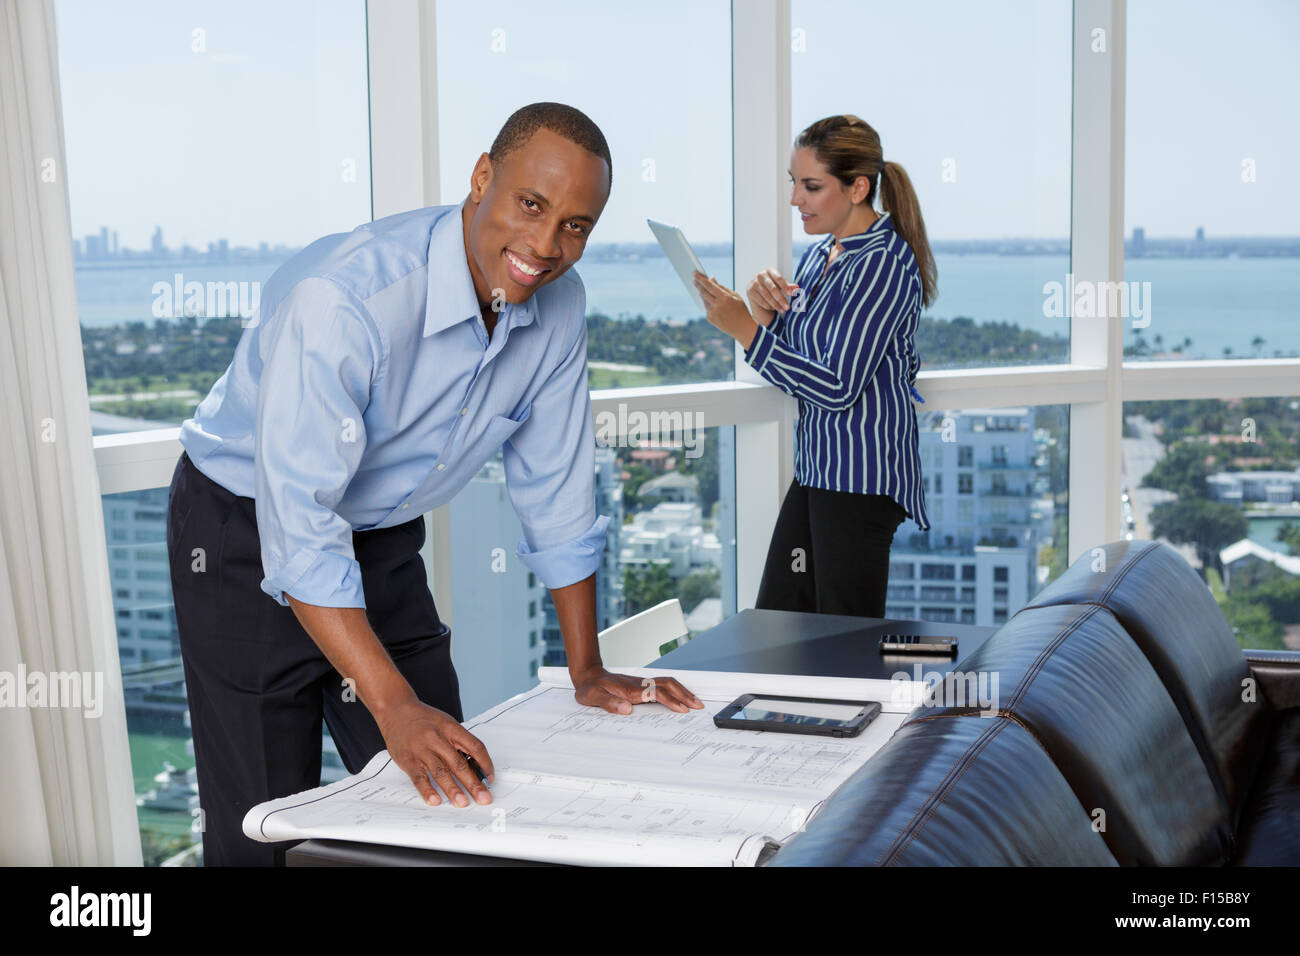 Happy male architect working with his female colleague using digital tablet Stock Photo